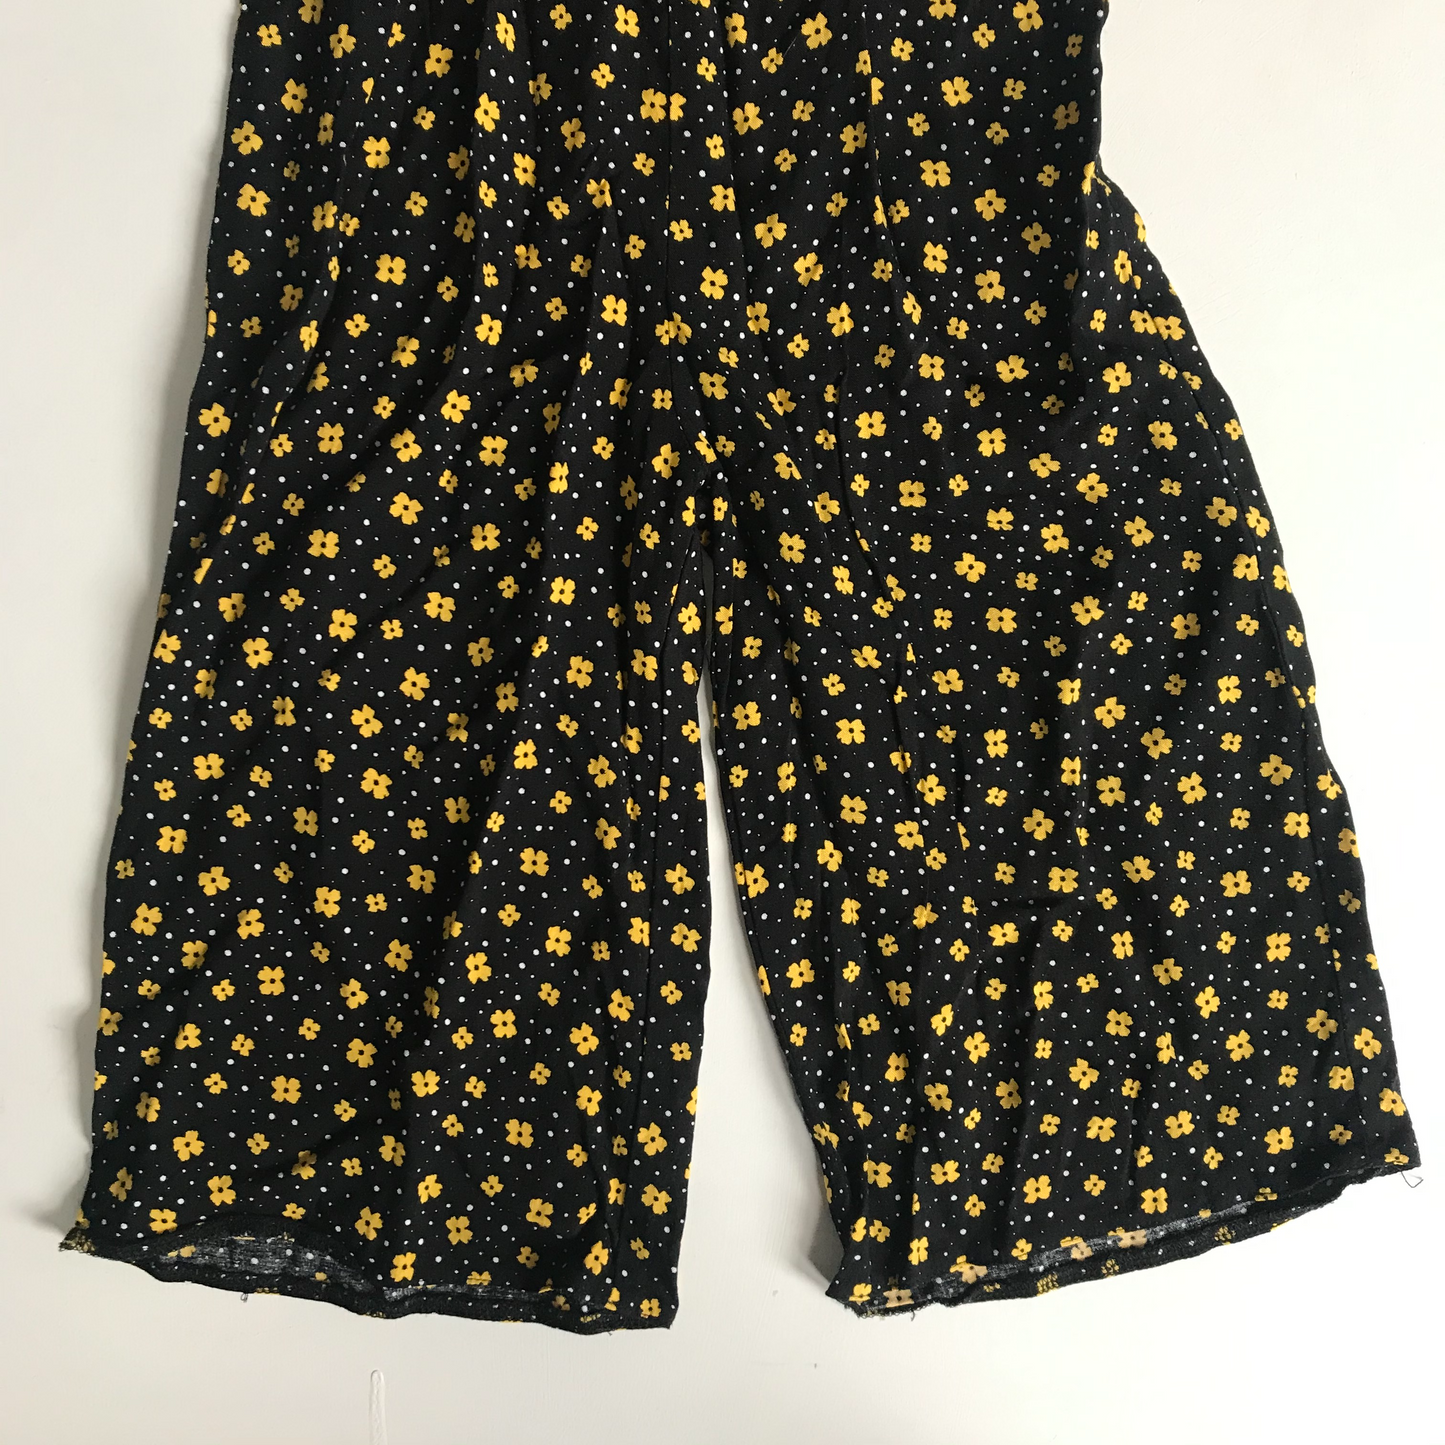 Jumpsuit - Black with small yellow flower - Age 5